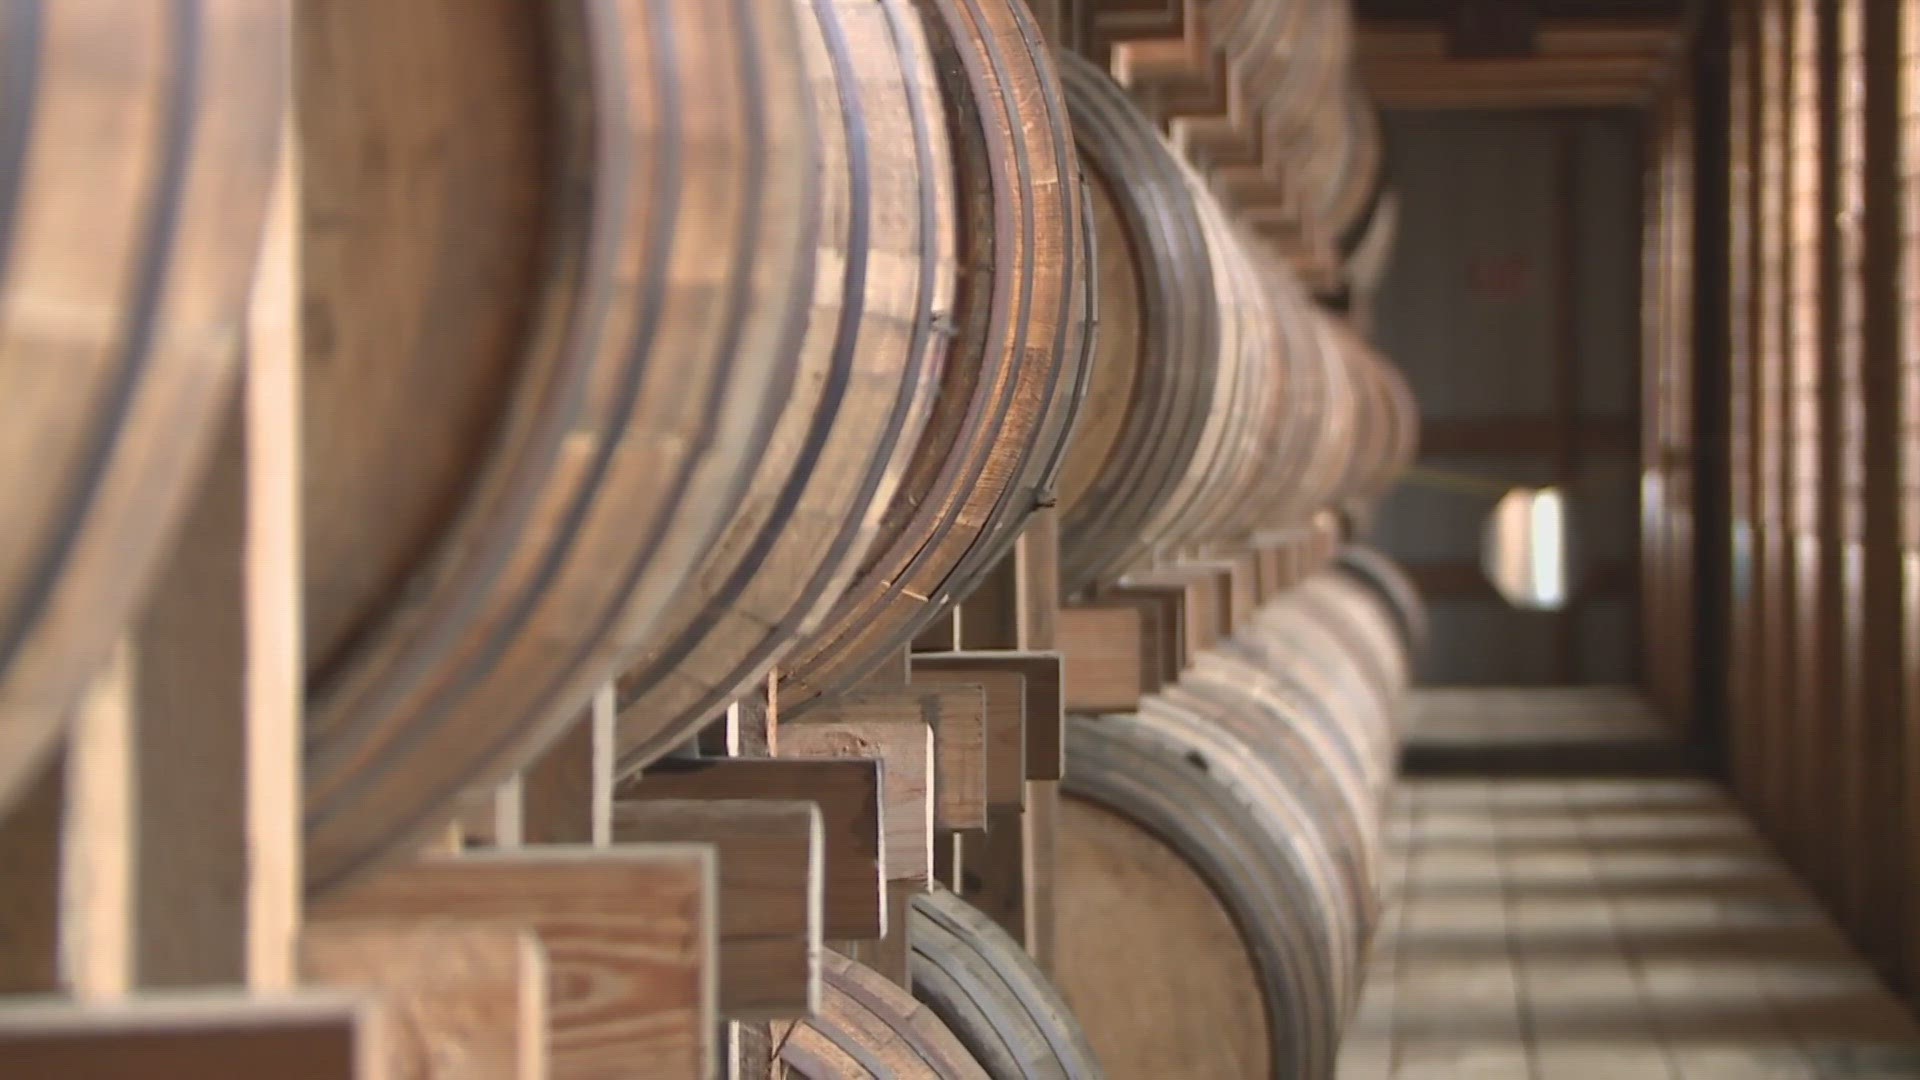 While Bourbon may be king in Kentucky, craft breweries are booming and the growing market for different types of alcohol only means good things for Kentucky.